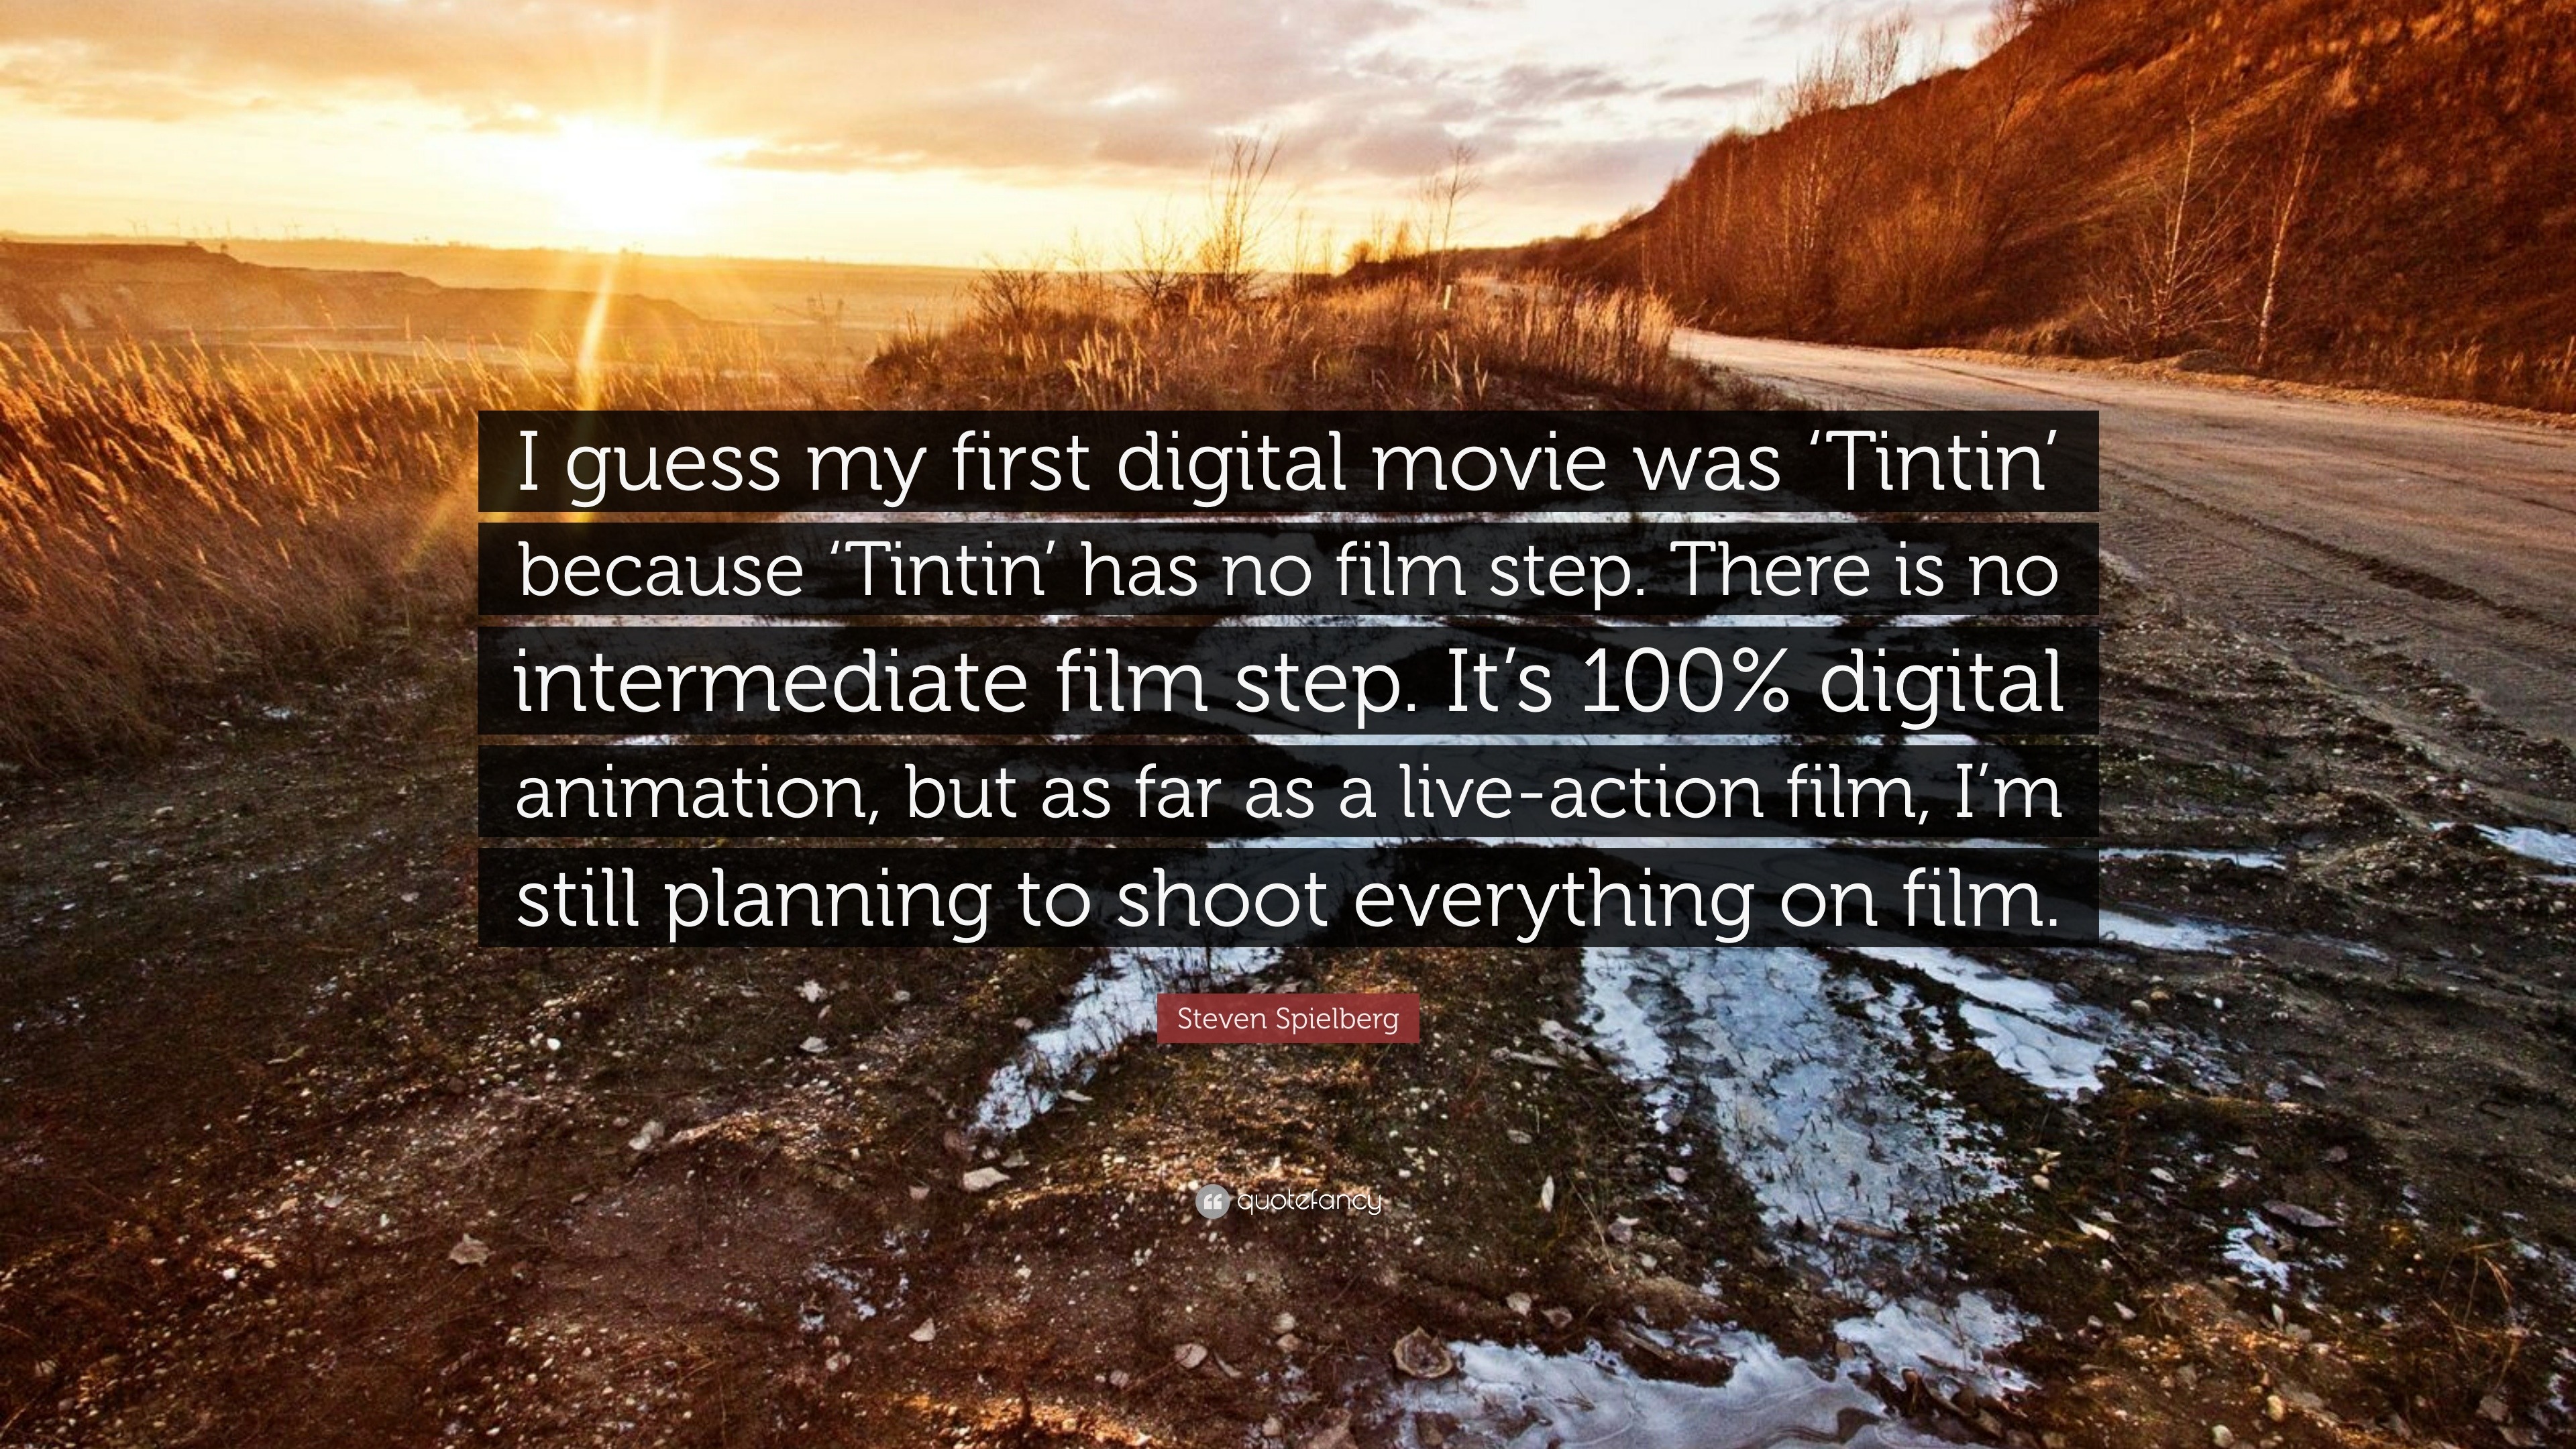 Steven Spielberg Quote: “I guess my first digital movie was 'Tintin'  because 'Tintin' has no film step. There is no intermediate film step. It's  ...”